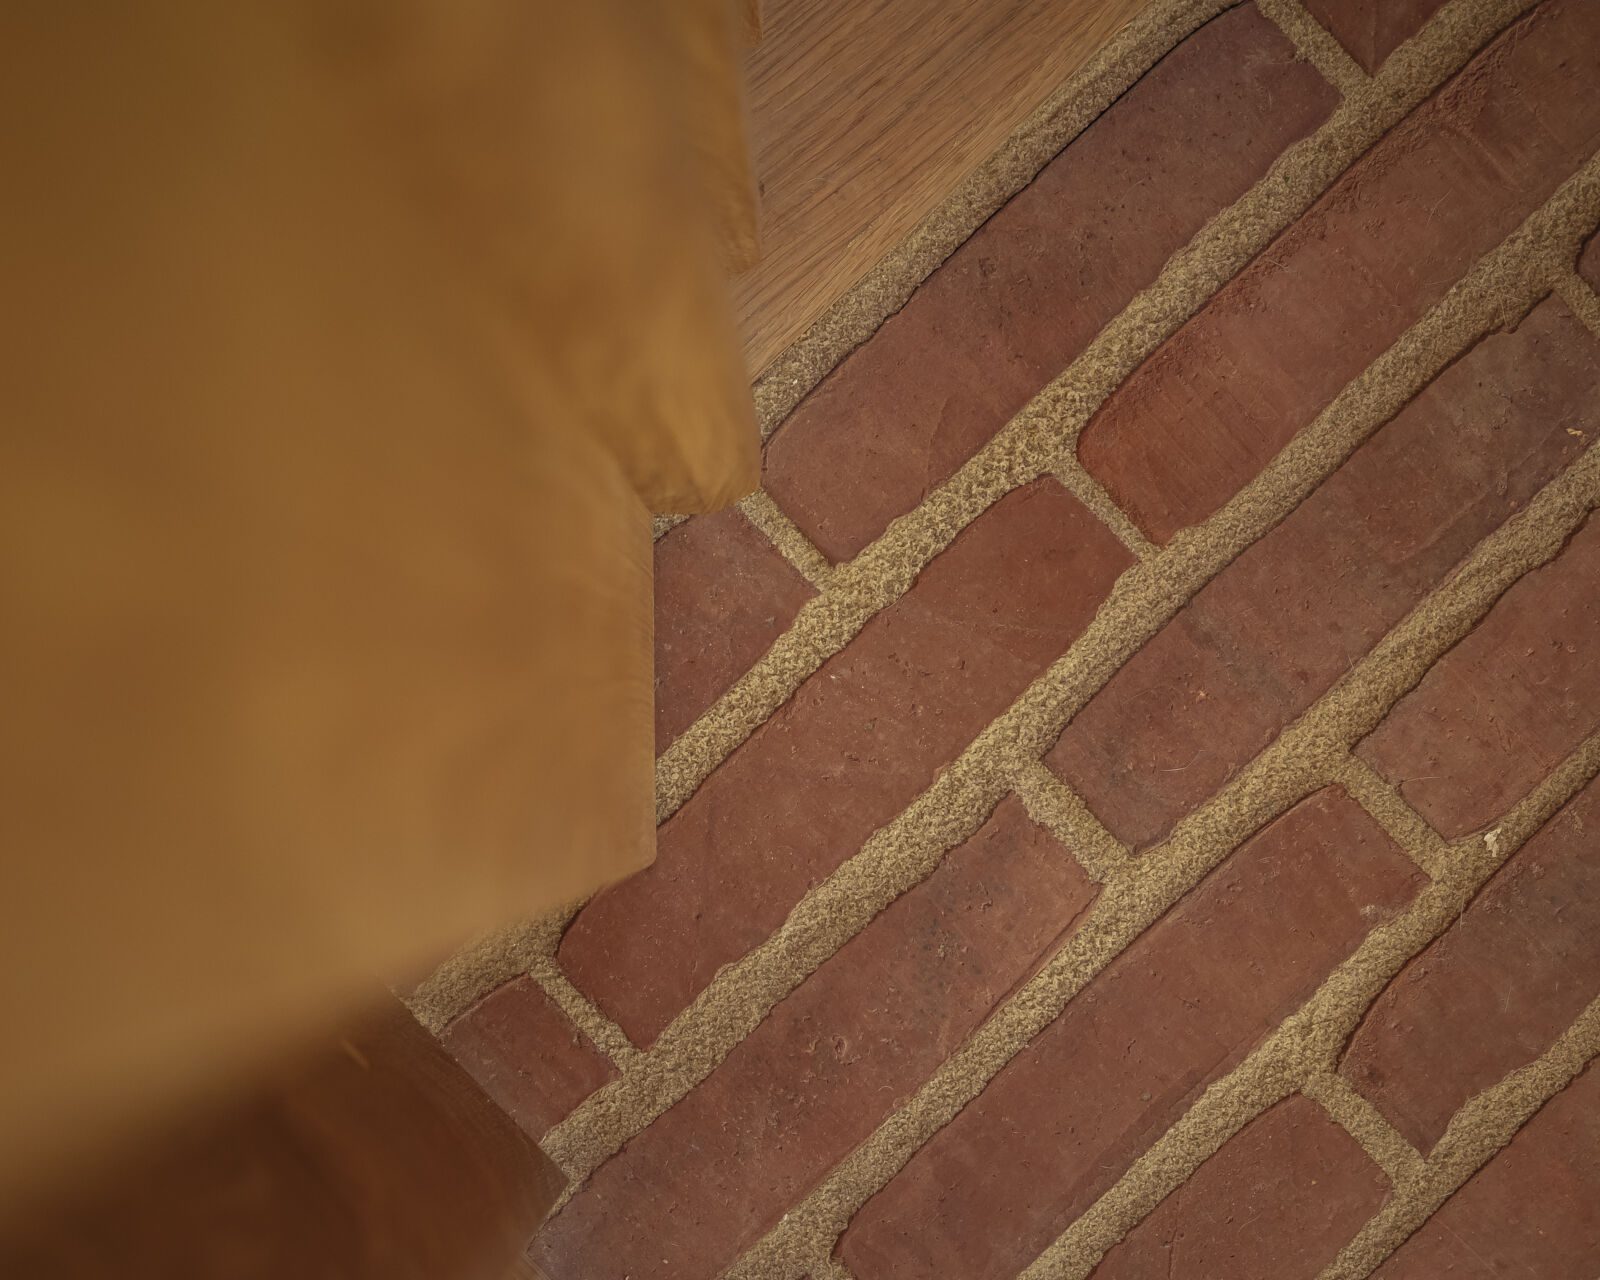 Brick provides texture to surfaces